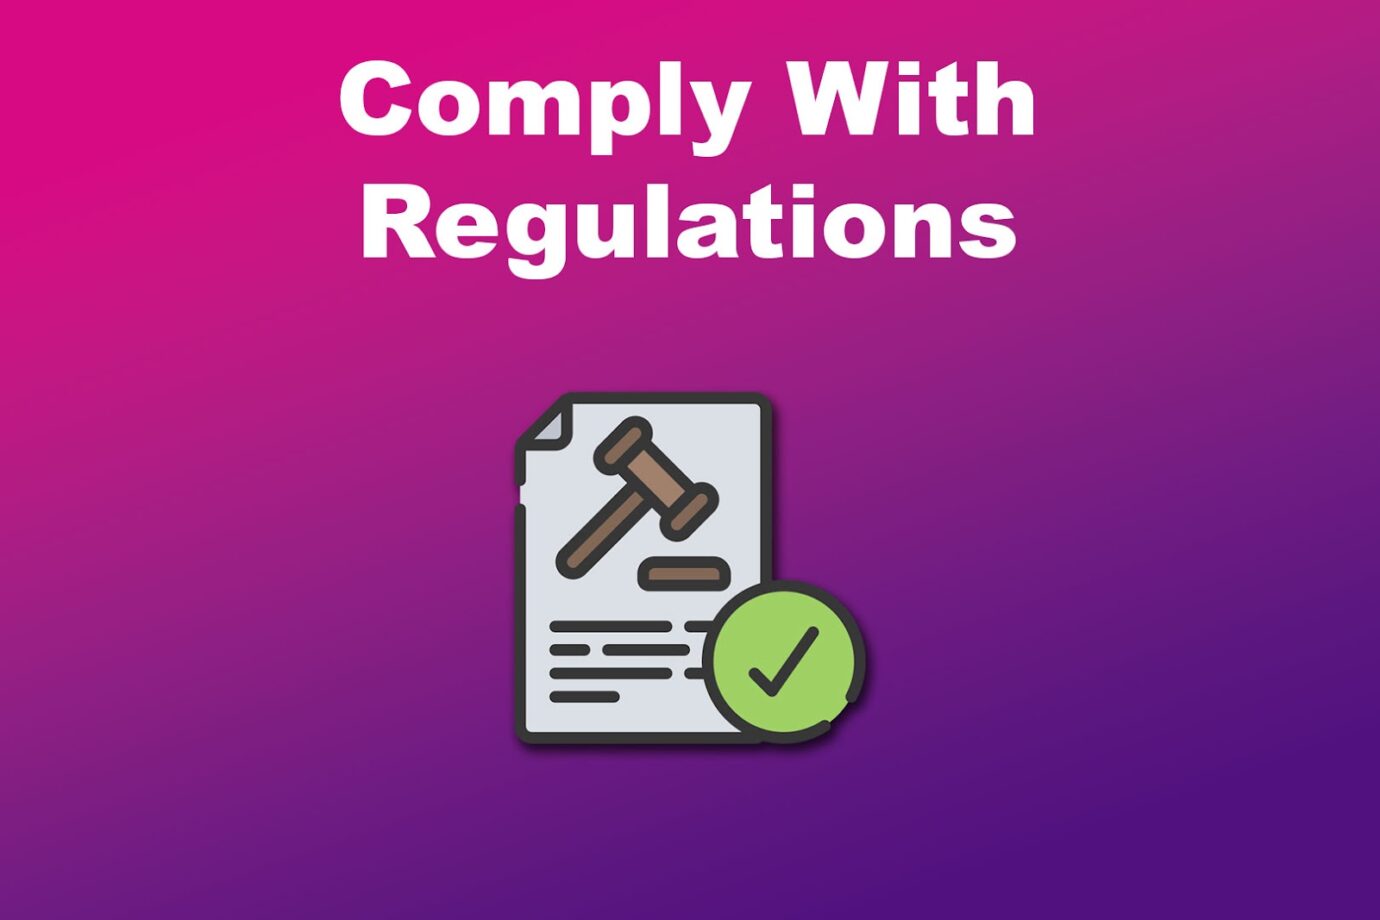 Record a Slack Huddle to Comply With Regulations